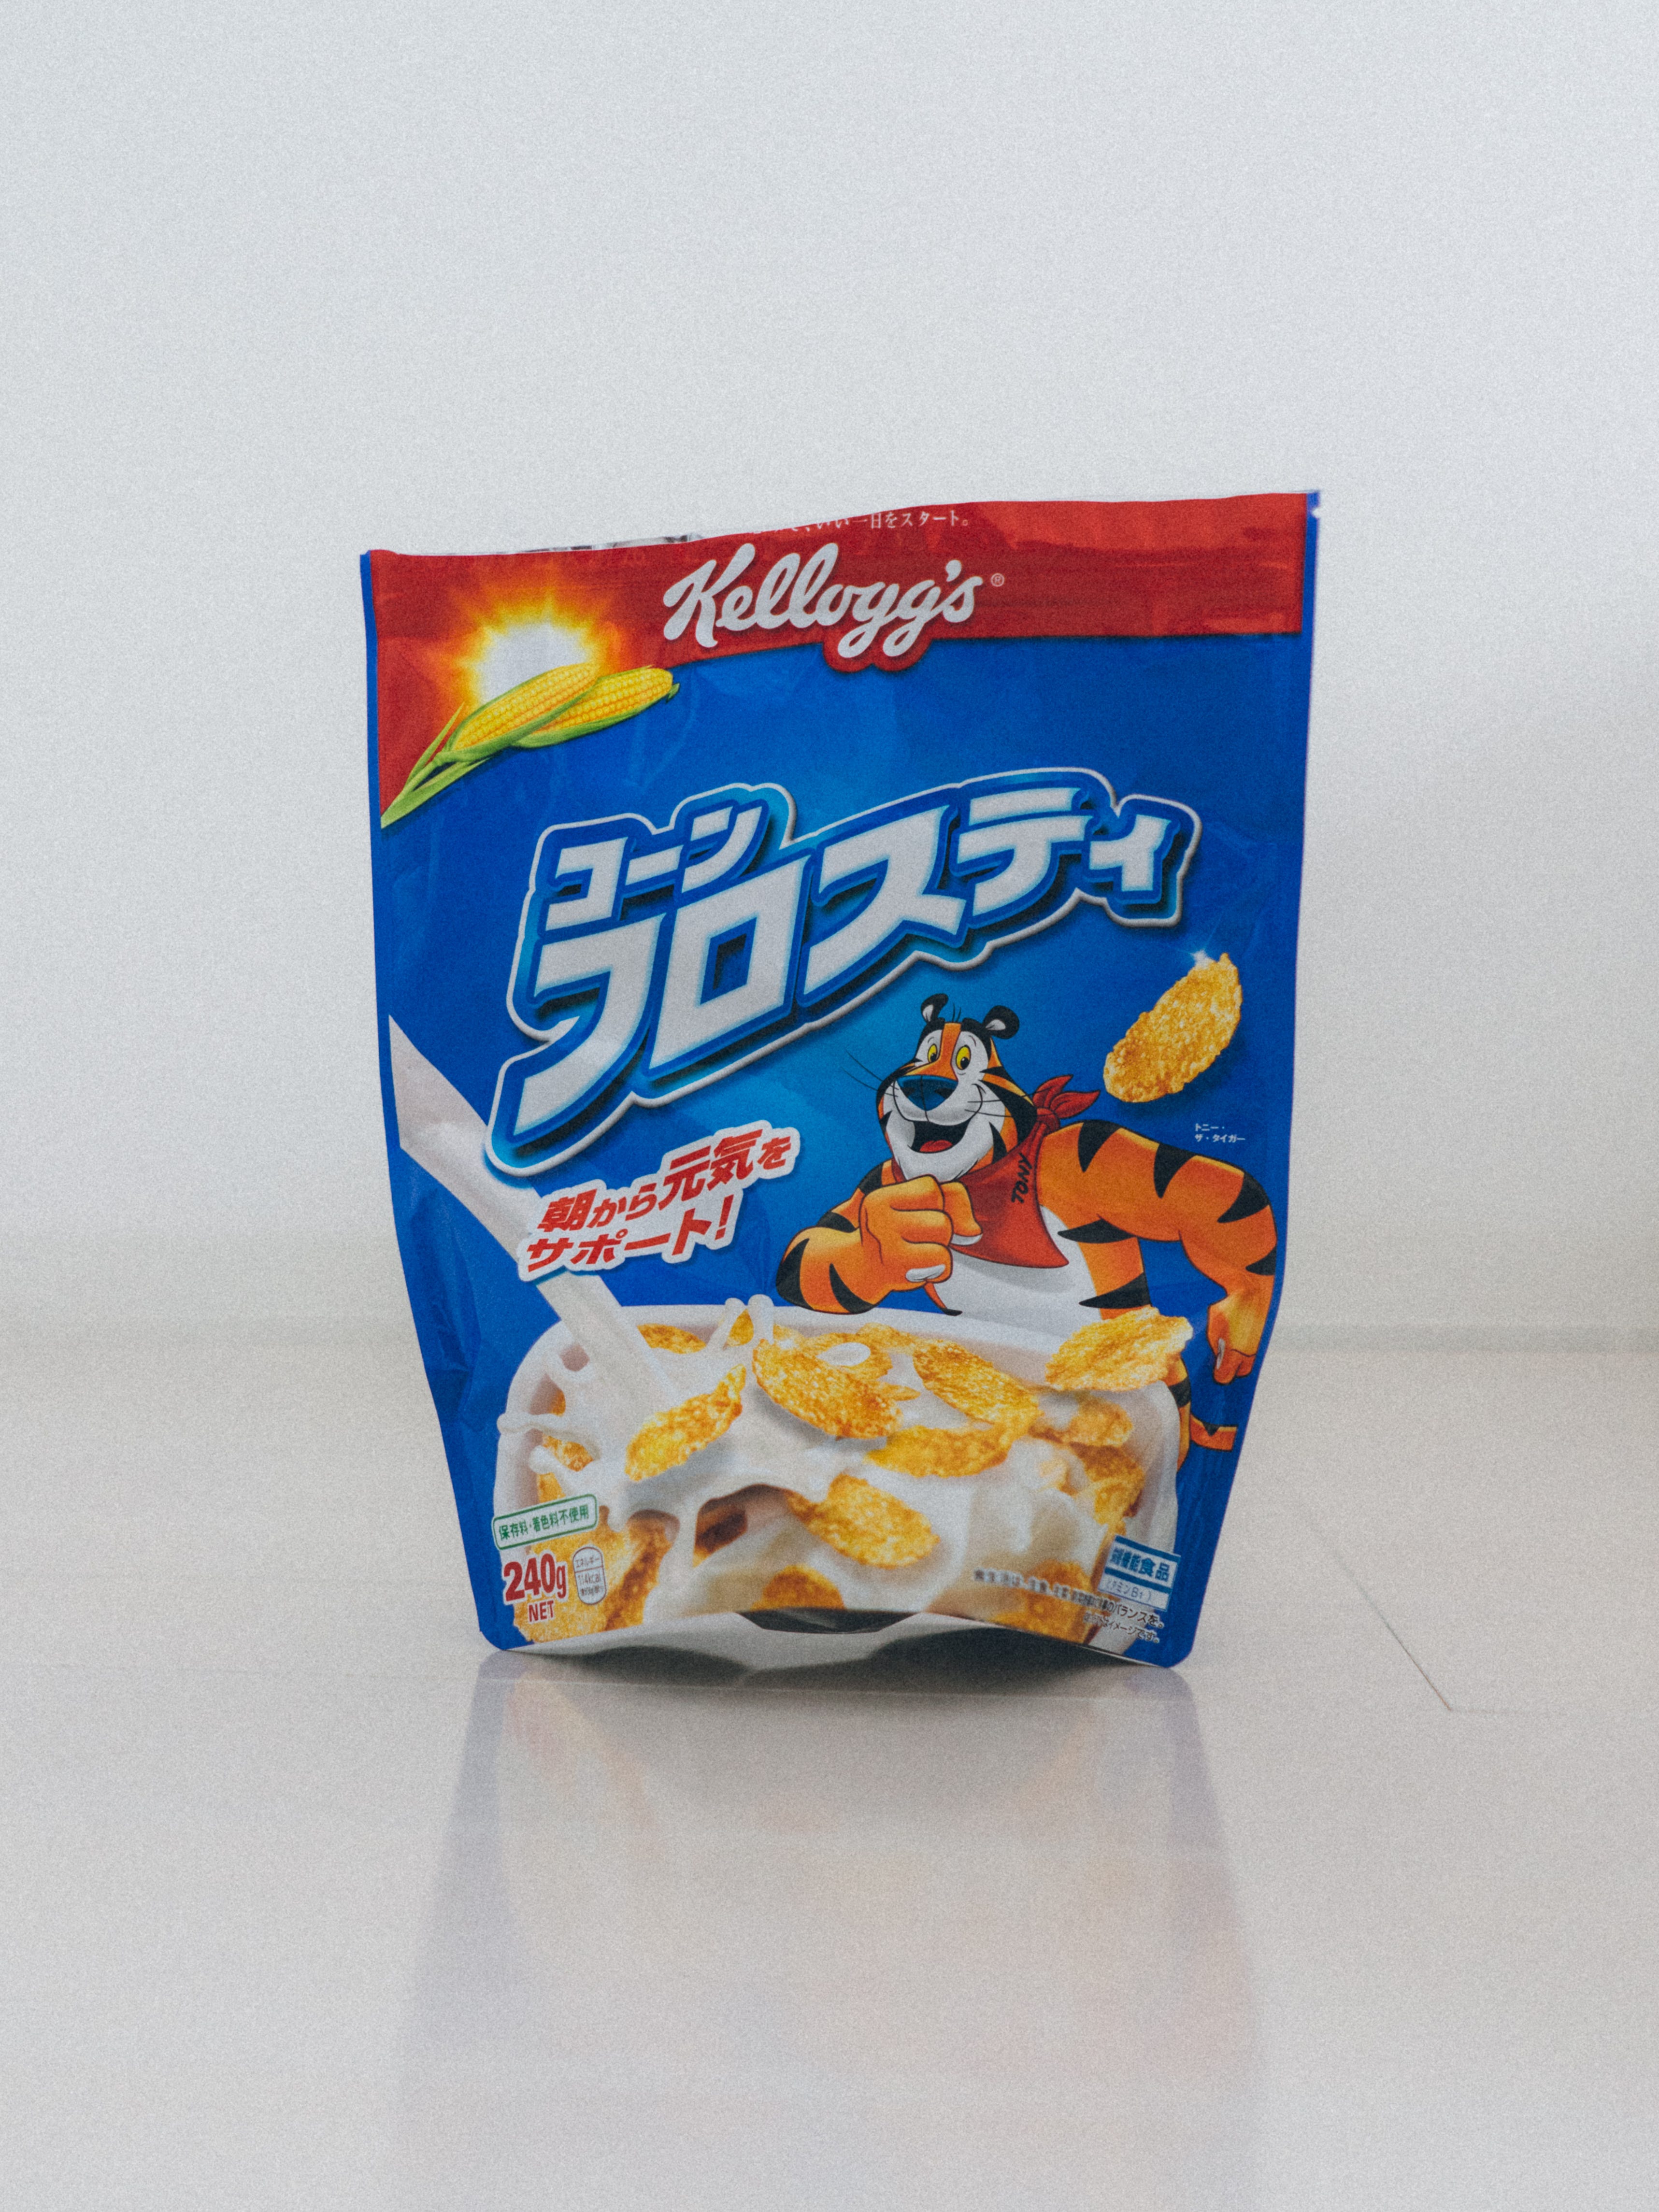 What makes Japanese food packaging more innovative and user